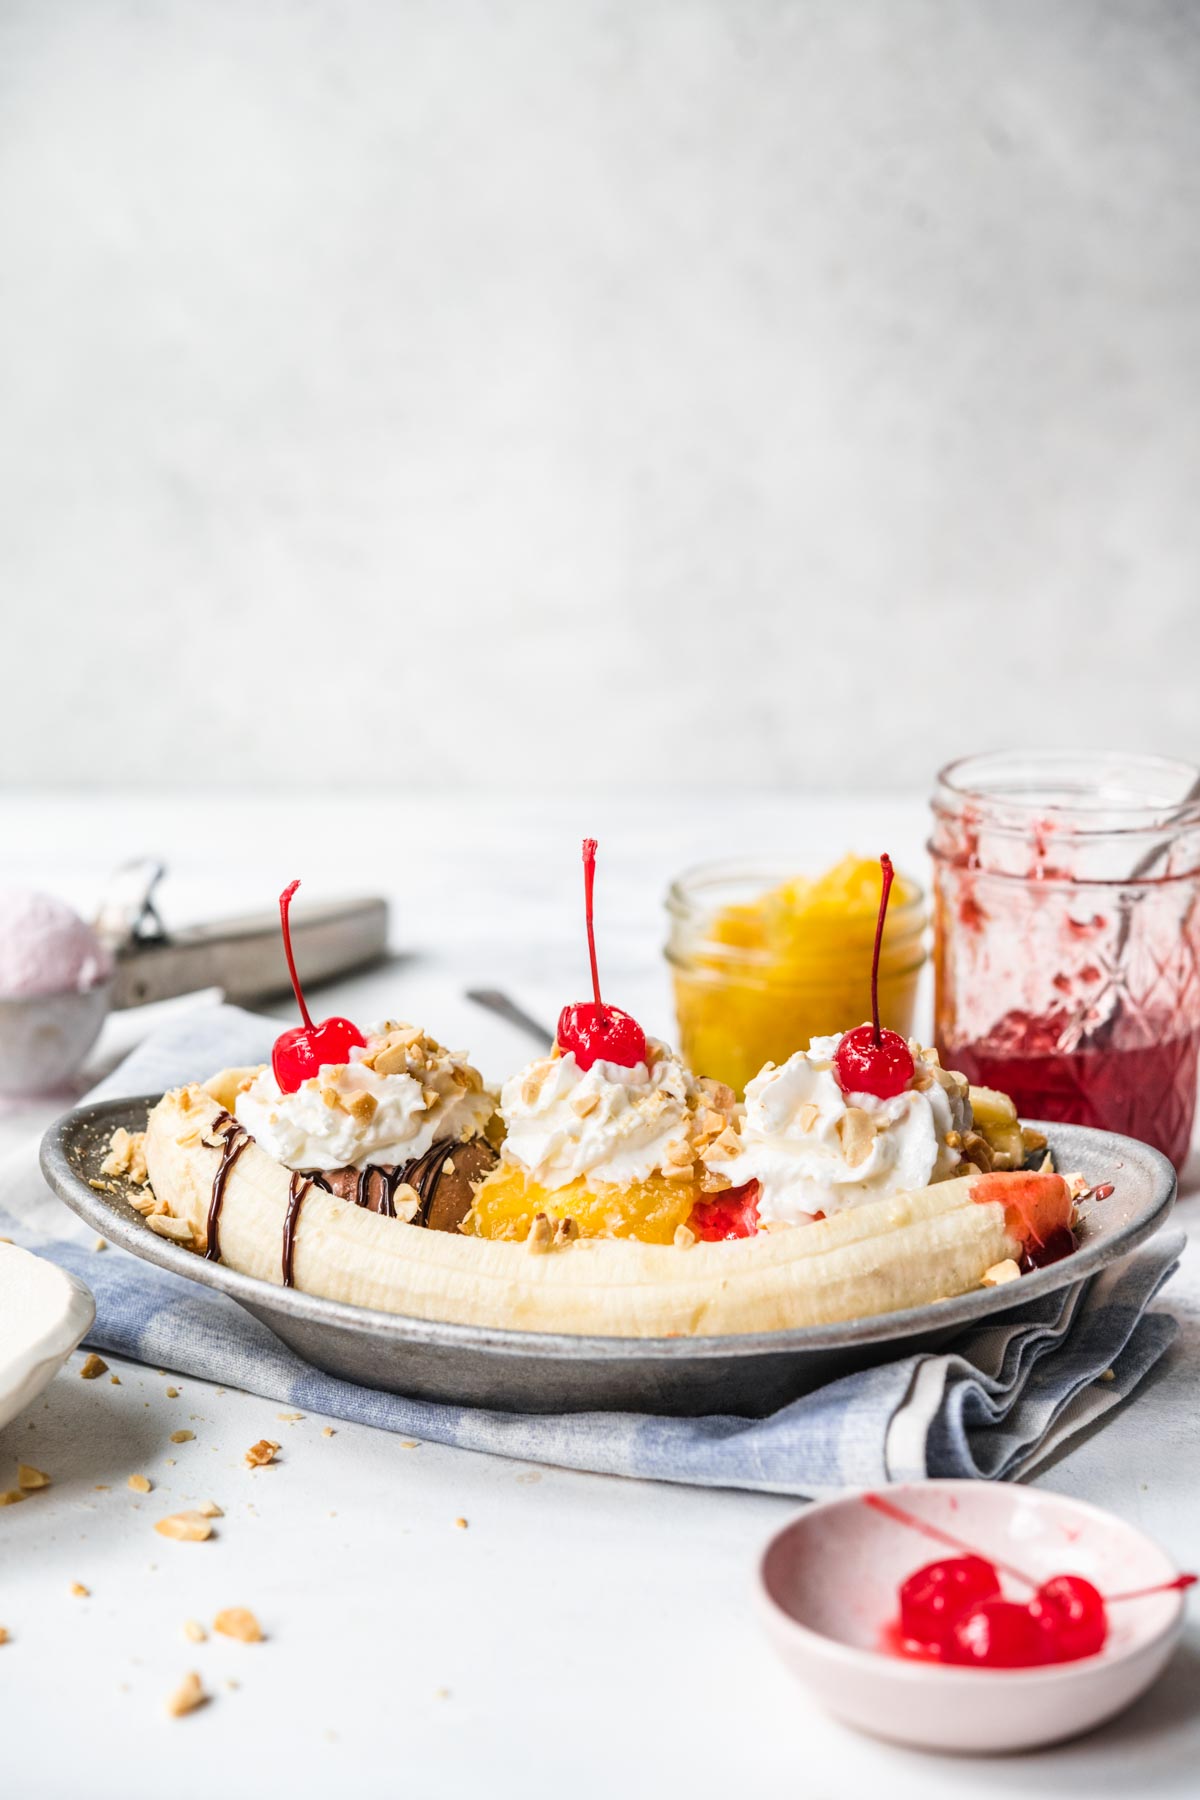 Banana Split on plate with chocolate, pineapple, and strawberry topping